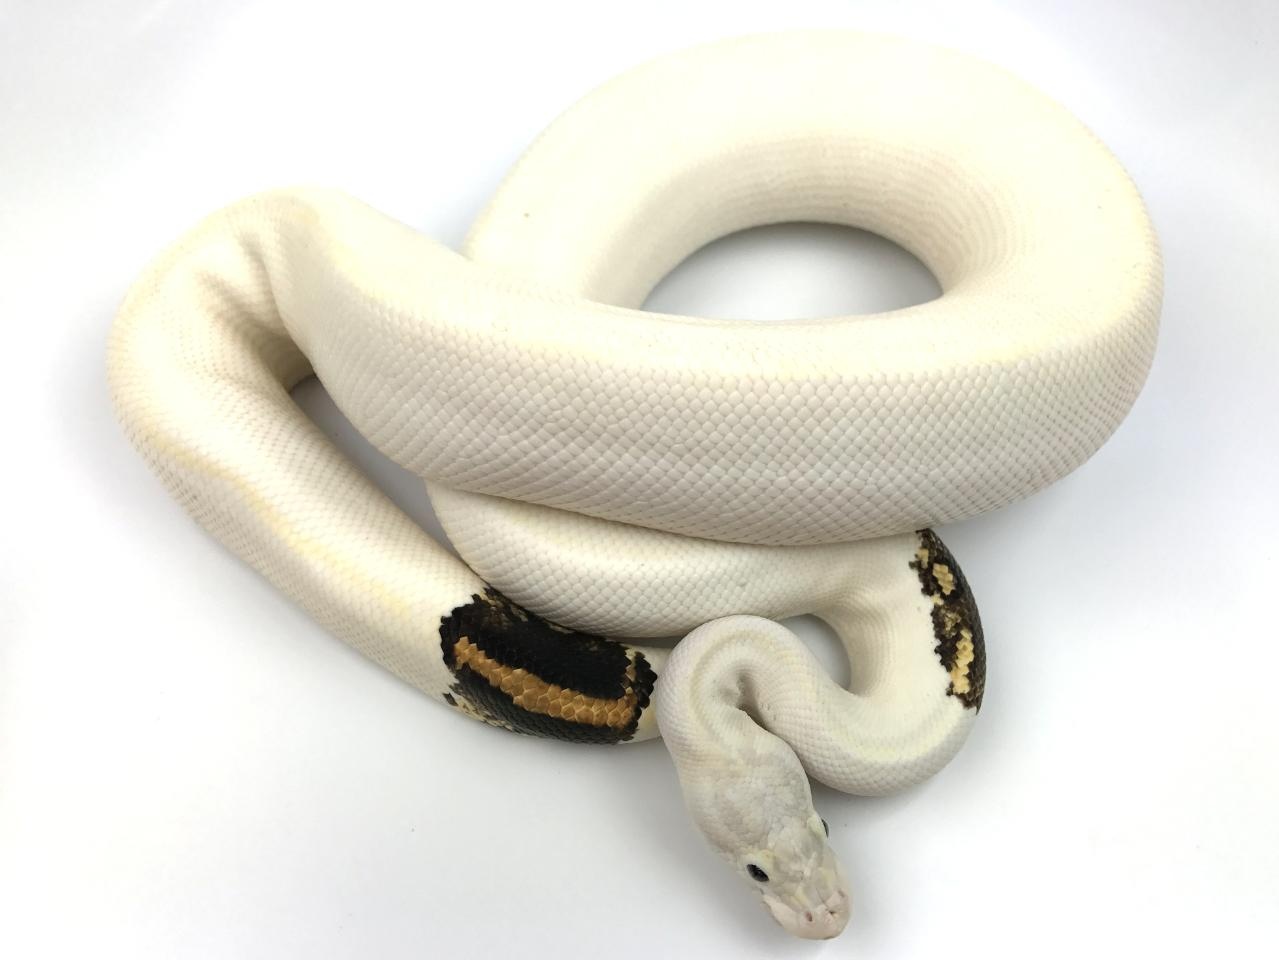 Paradox Ivory Ball Python by Royal Constrictor Designs